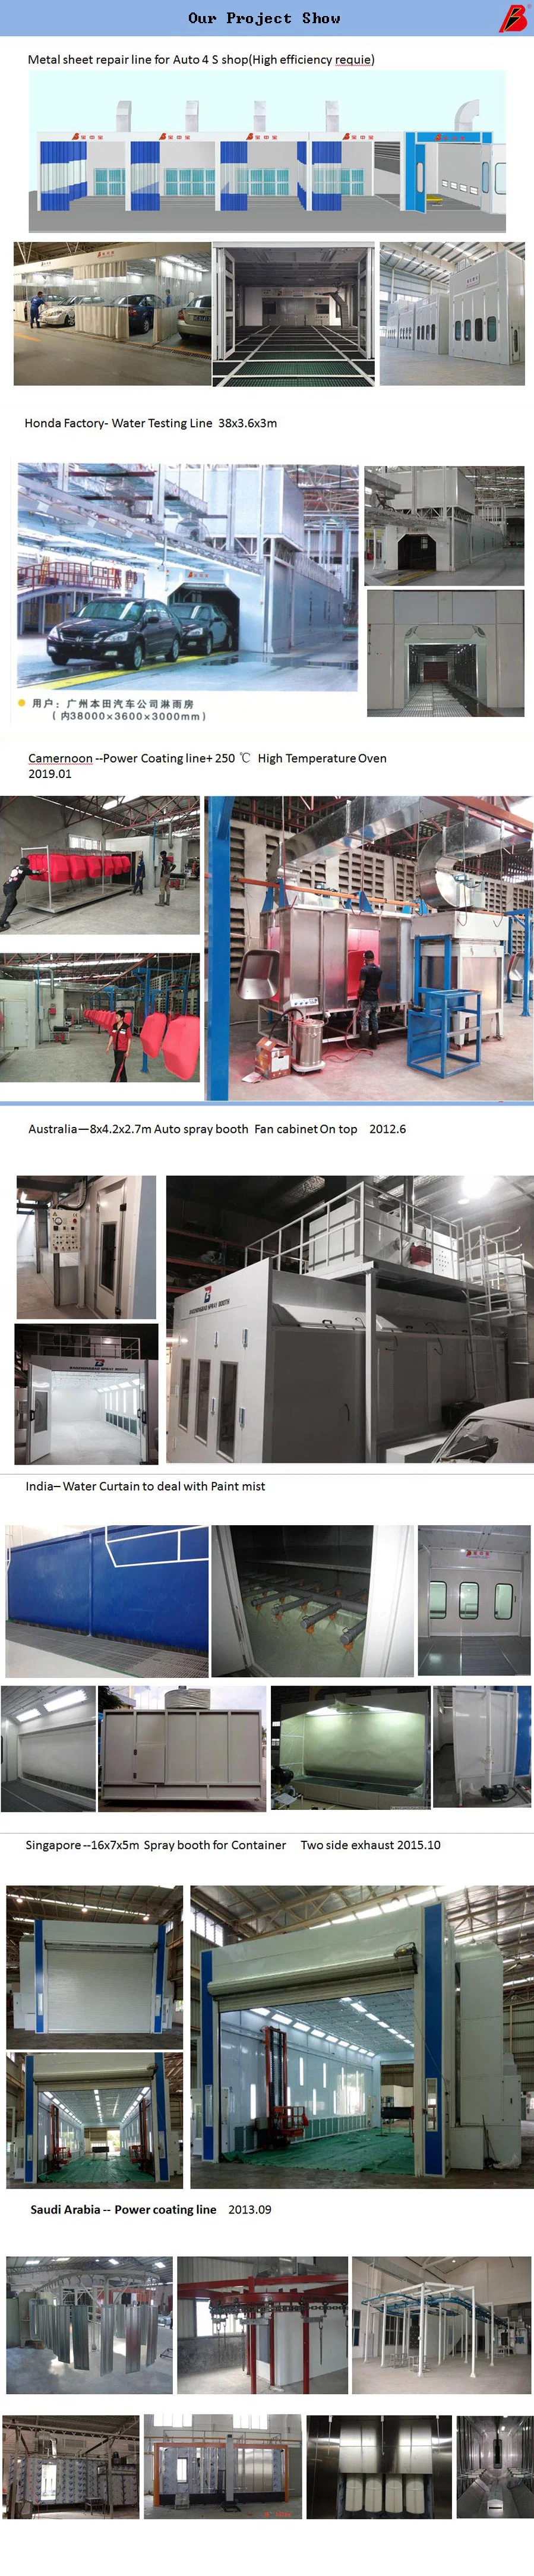 Europe Technical Sand Blasting Room Large Dust Collect System